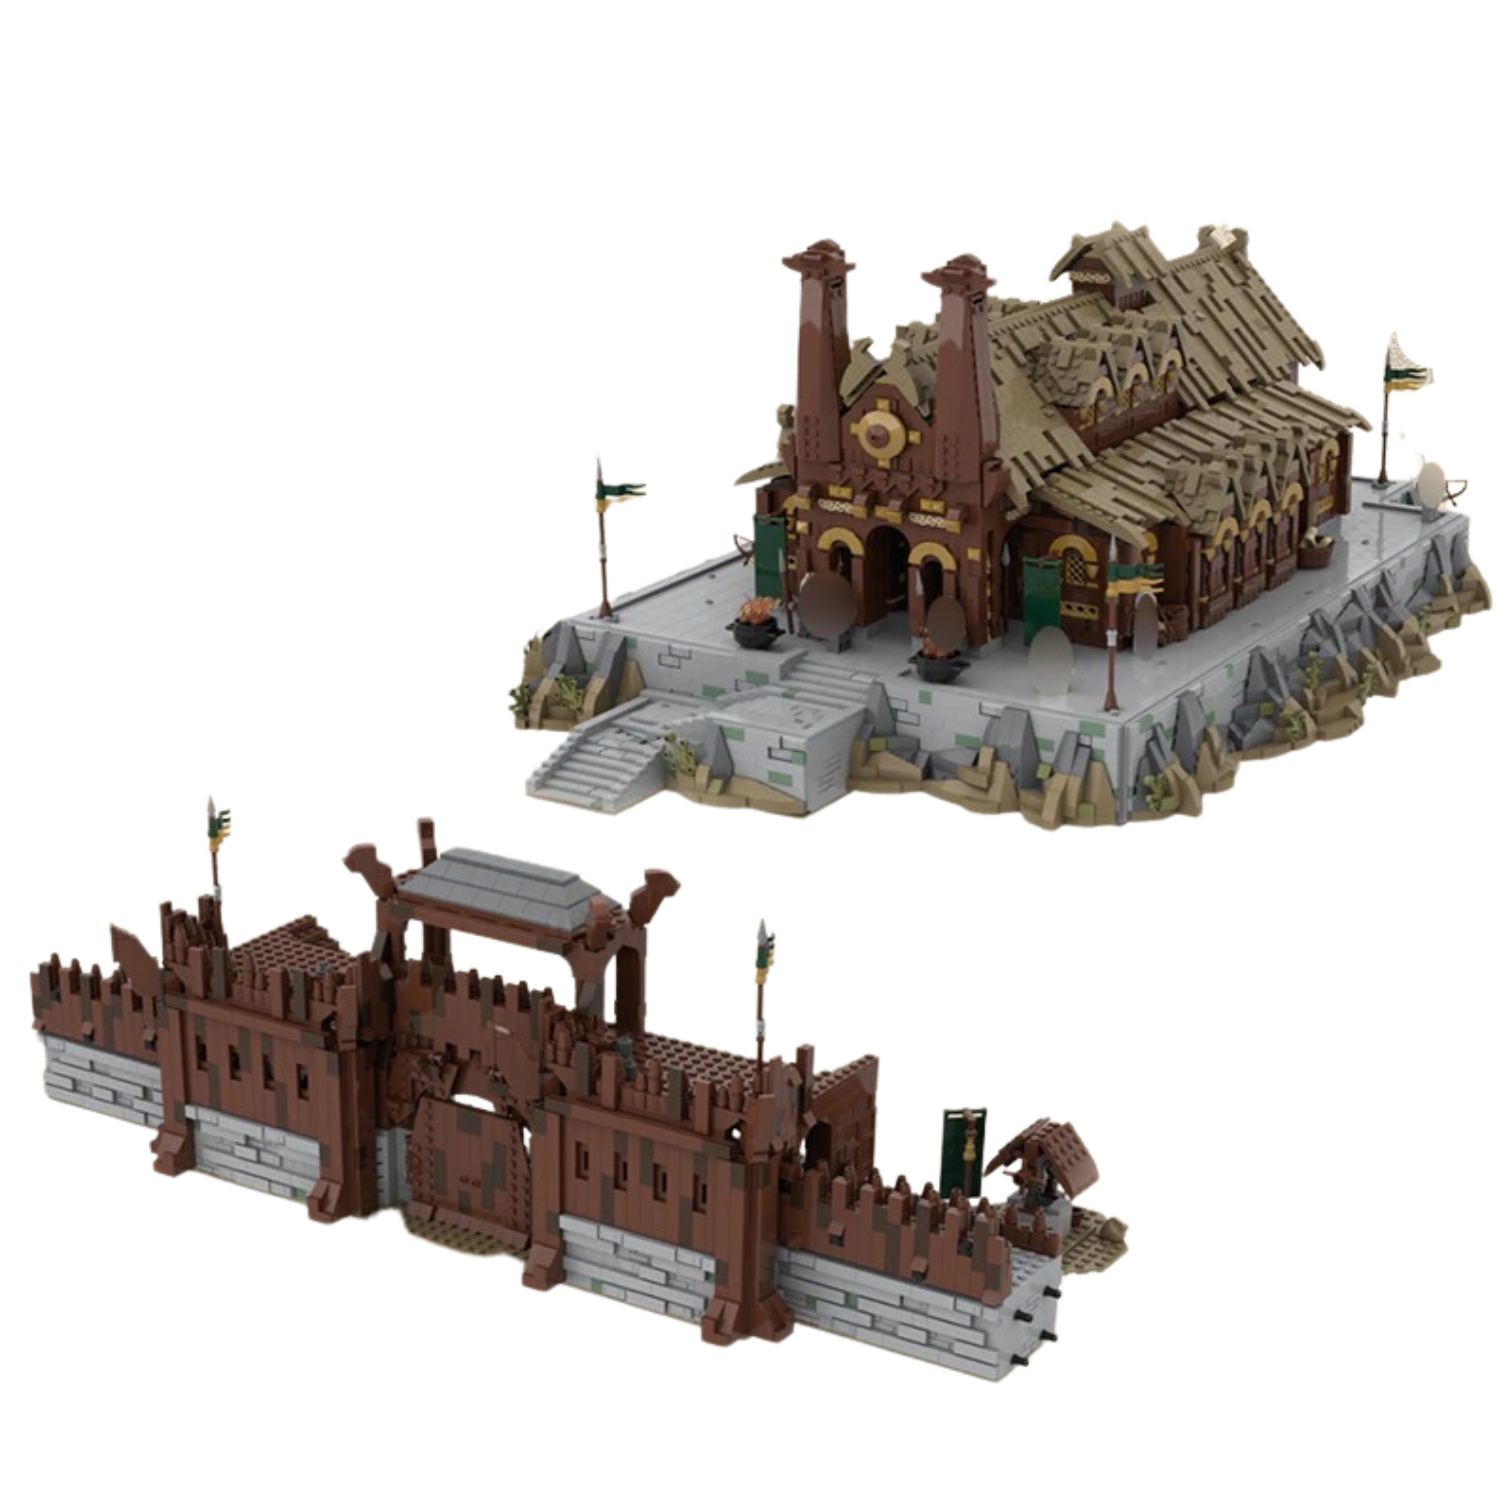 UCS Edoras - Meduseld Golden Hall And Great Walls MOC-62288-65377 Modular Building With 10116 Pieces